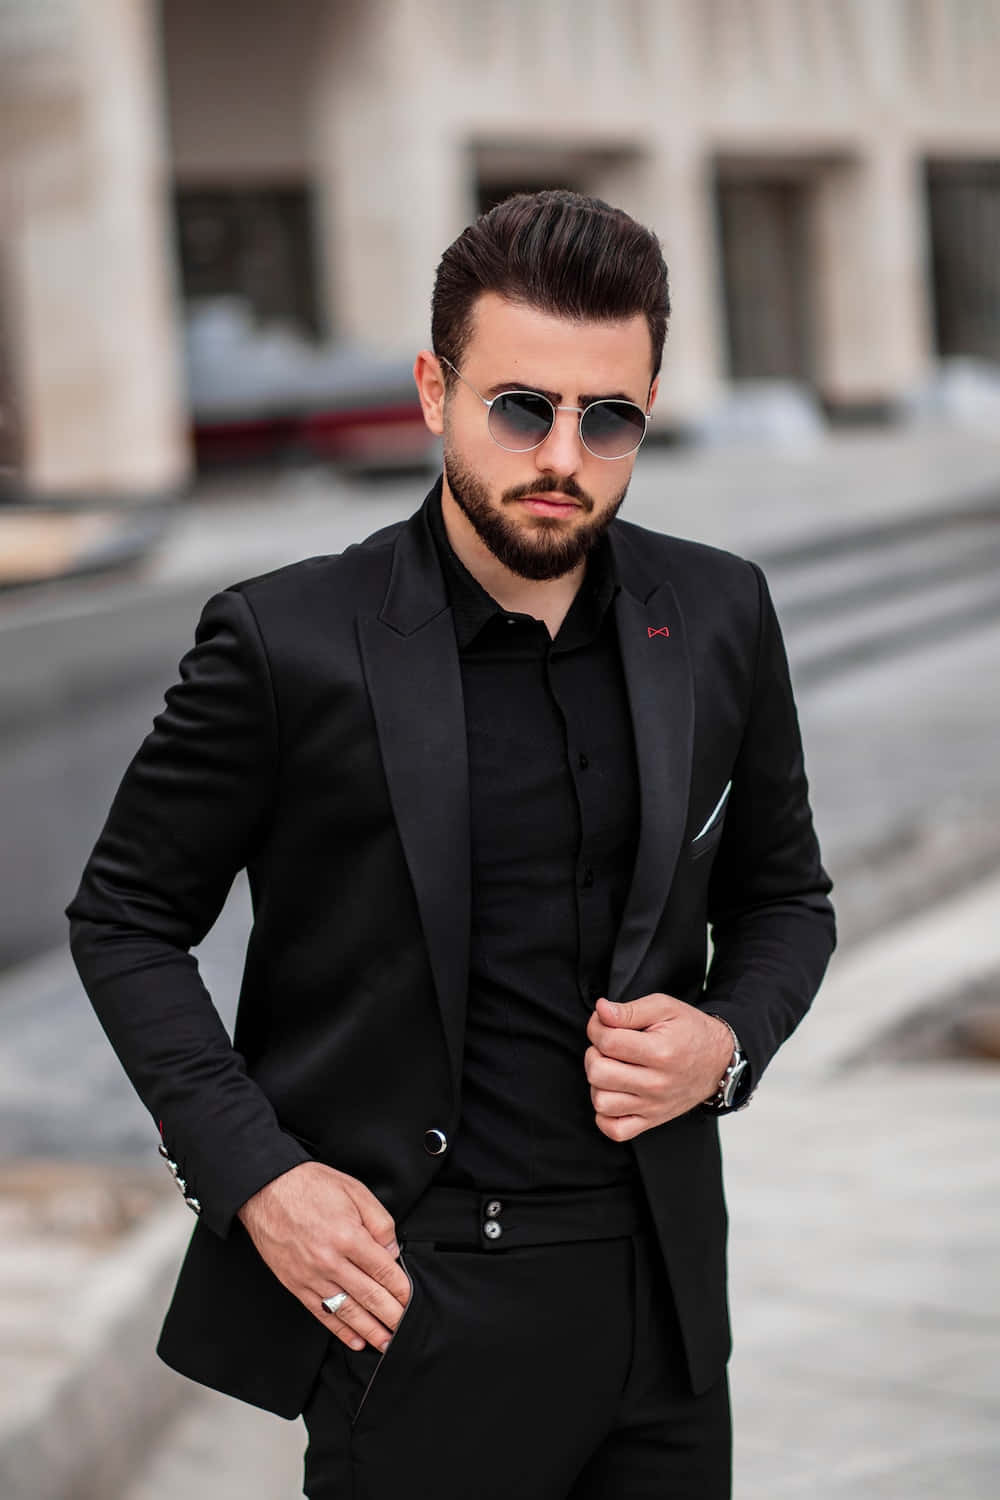 A Man In A Black Suit And Sunglasses